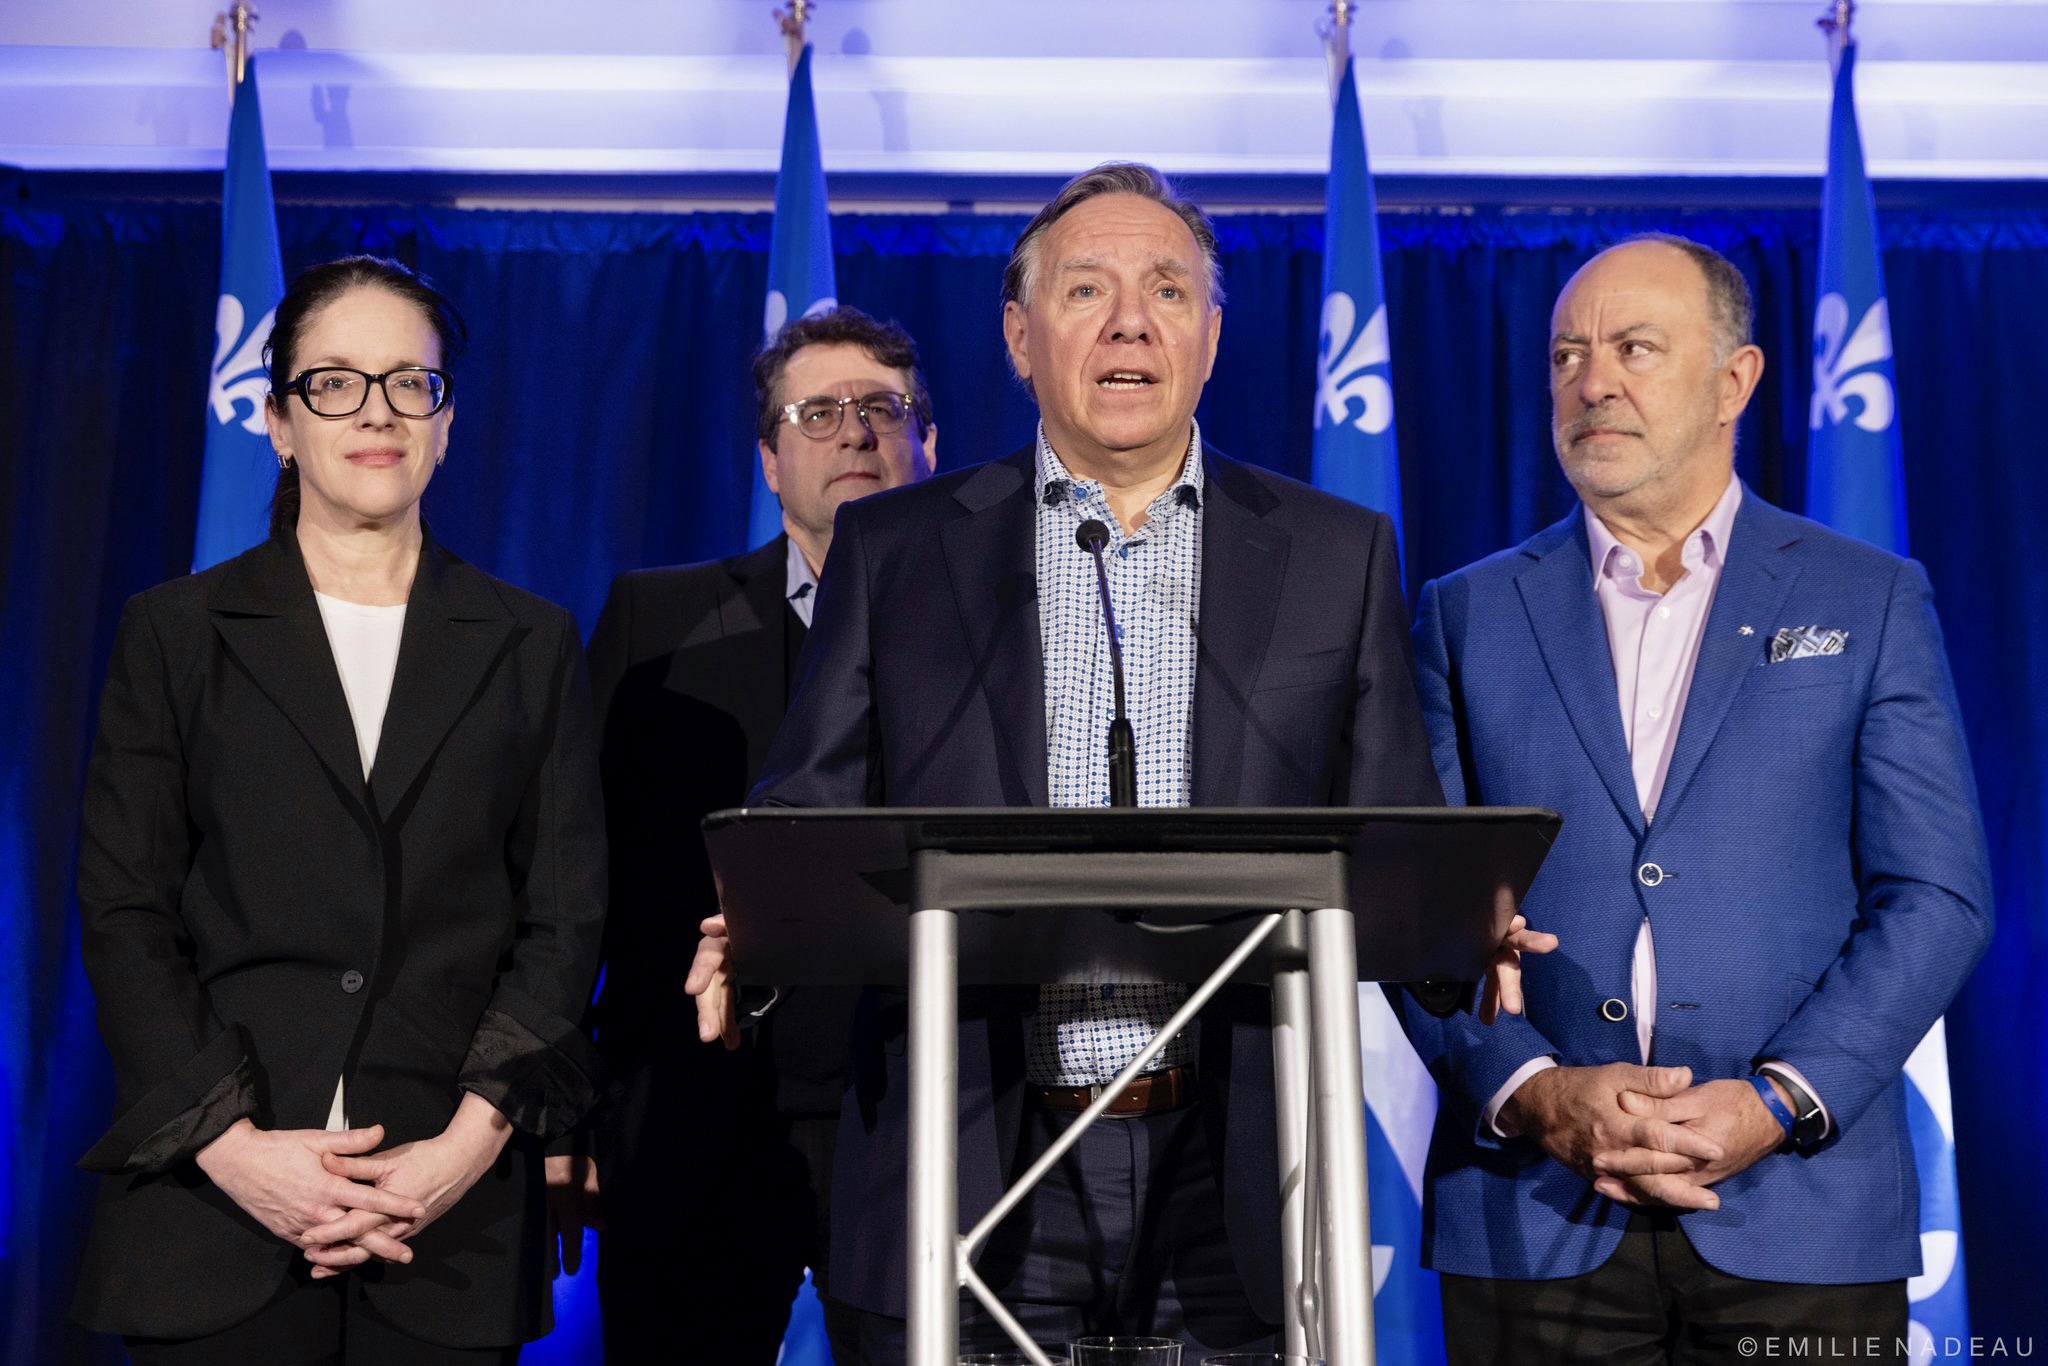 The latest CAQ ad suggests, ‘Change what doesn’t work: your government’